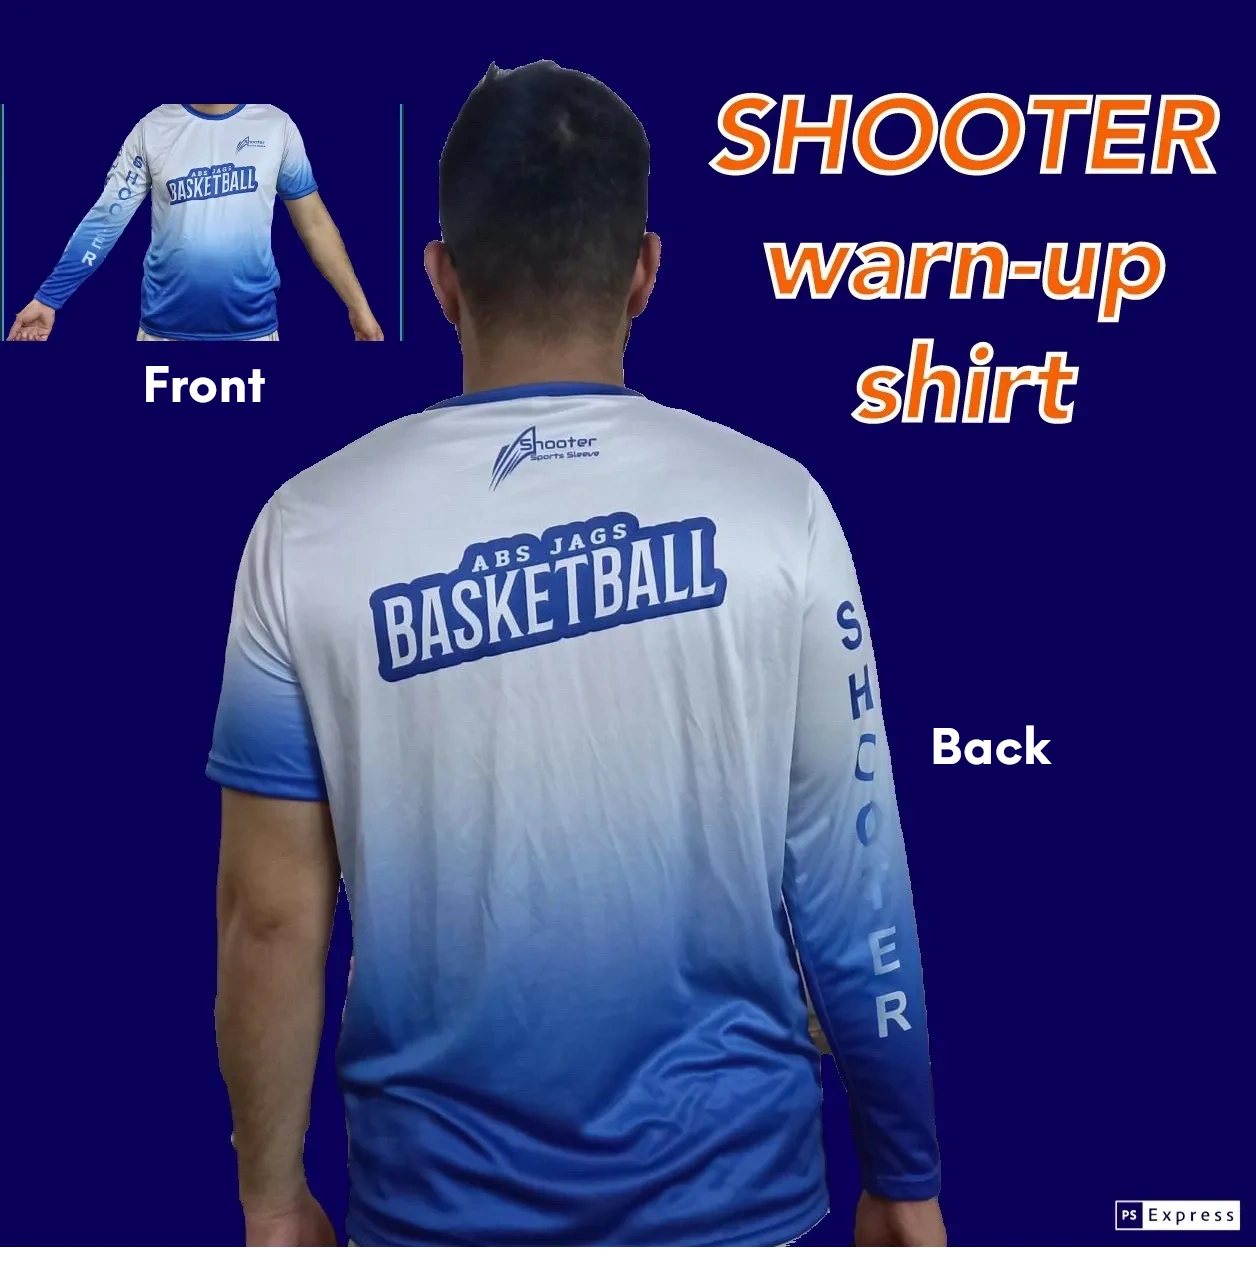 Basketball Shooting Shirts - Warmup in Style with Custom Designs